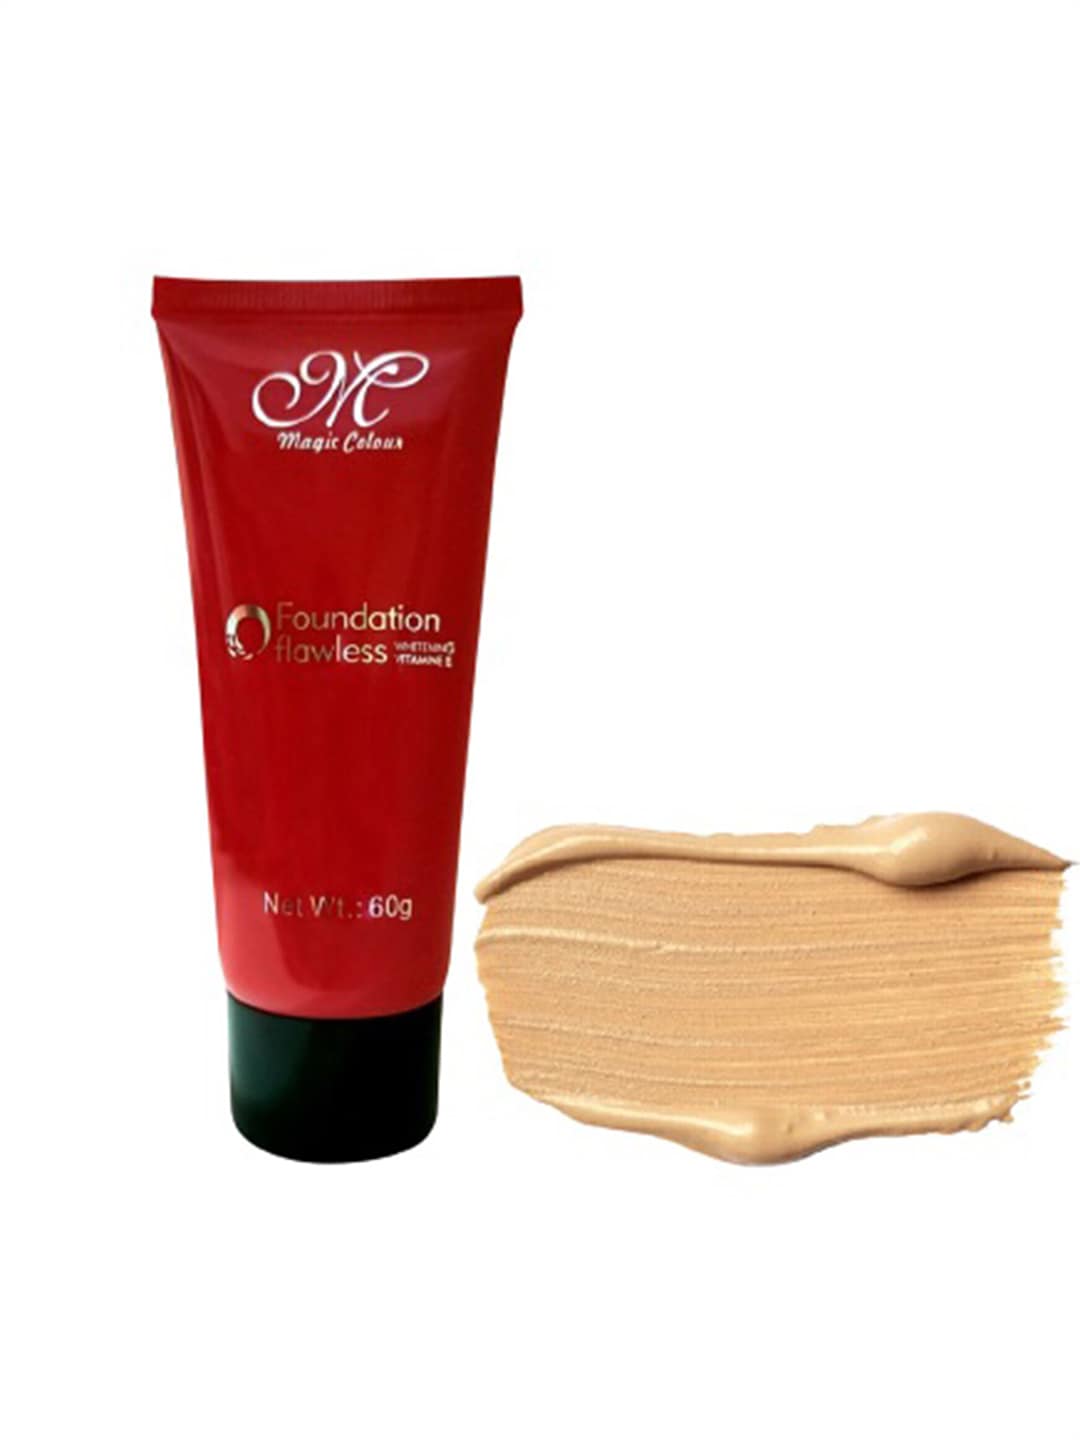 Magic Colour Flawless Whitening Foundation with Vitamin E 60 g - Natural Price in India